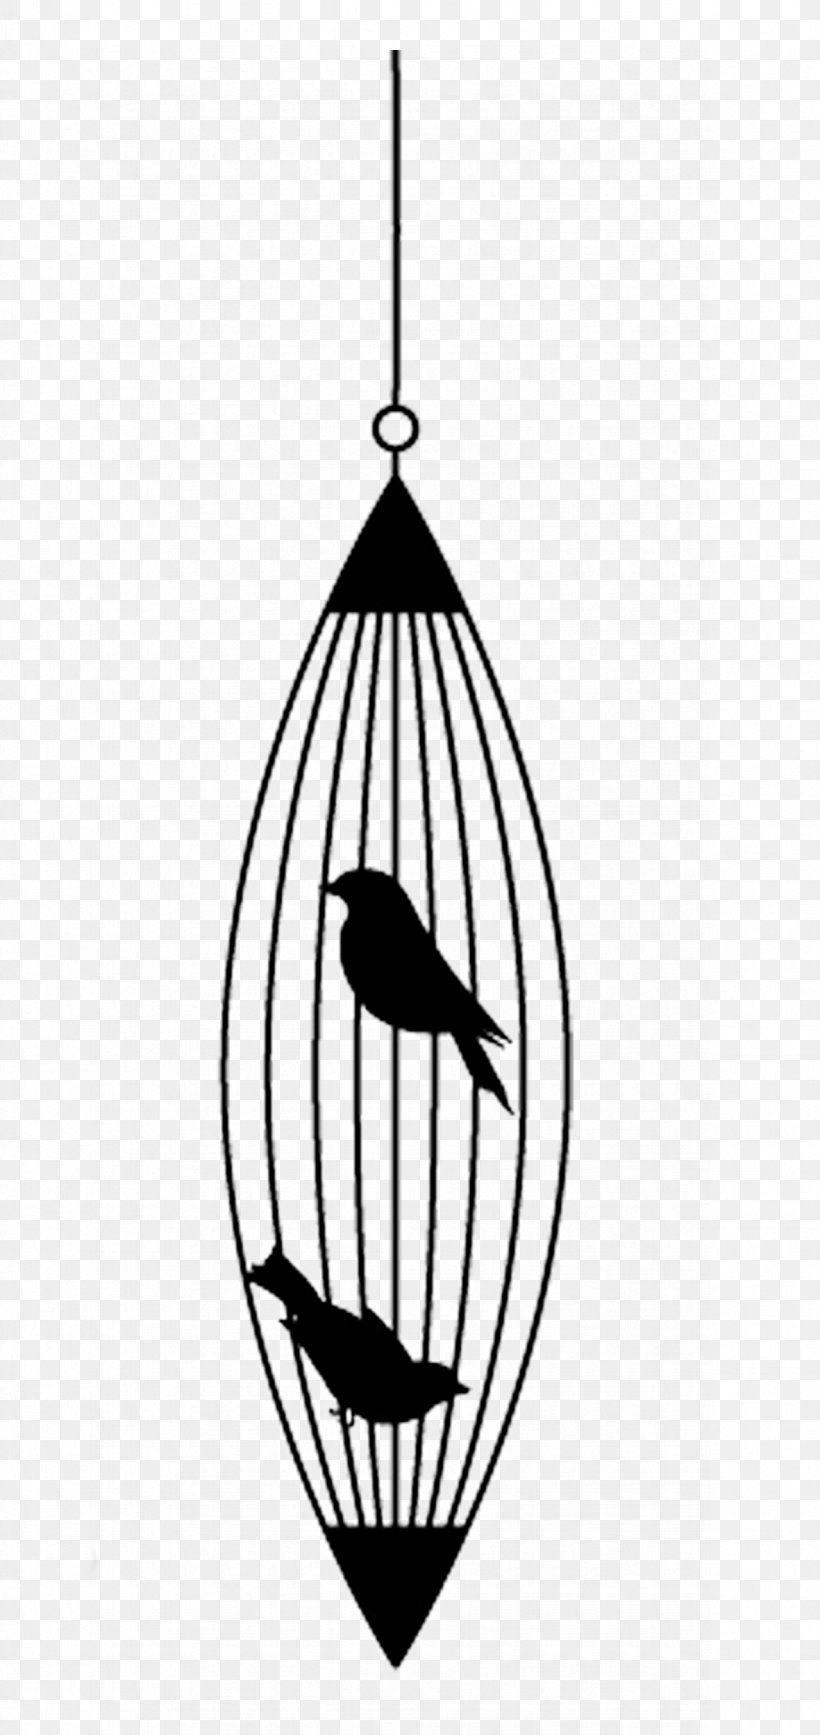 Oval Bird Cage, PNG, 1181x2500px, Bird, Birdcage, Black And White, Cage, Drawing Download Free